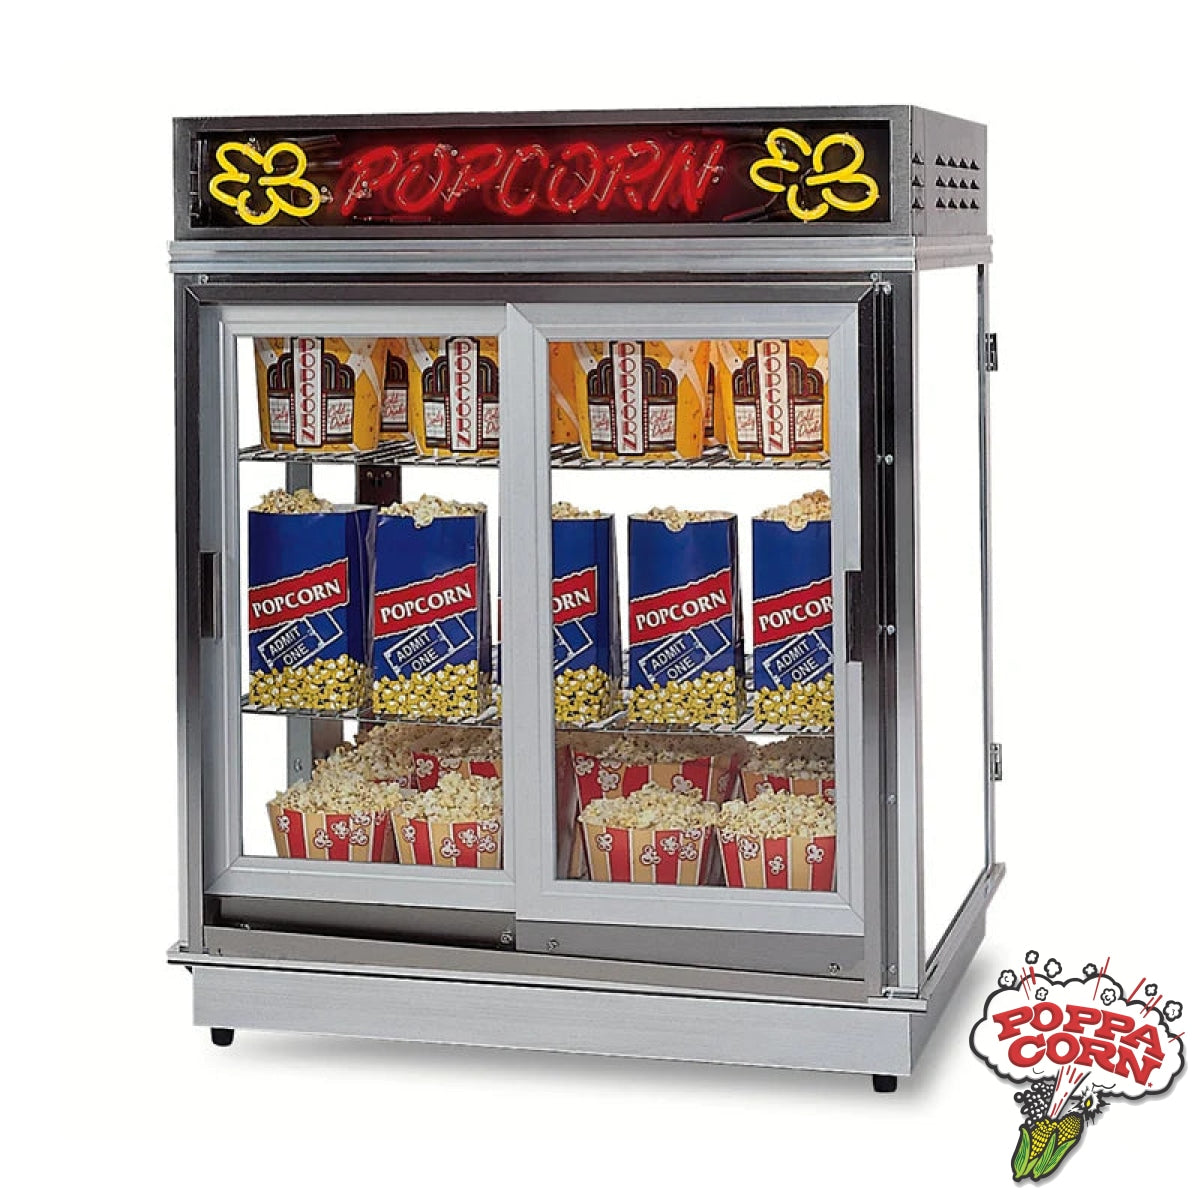 LED Neon Astro Staging Cabinet with Self-Serve Doors - GM2004SLN - Poppa Corn Corp